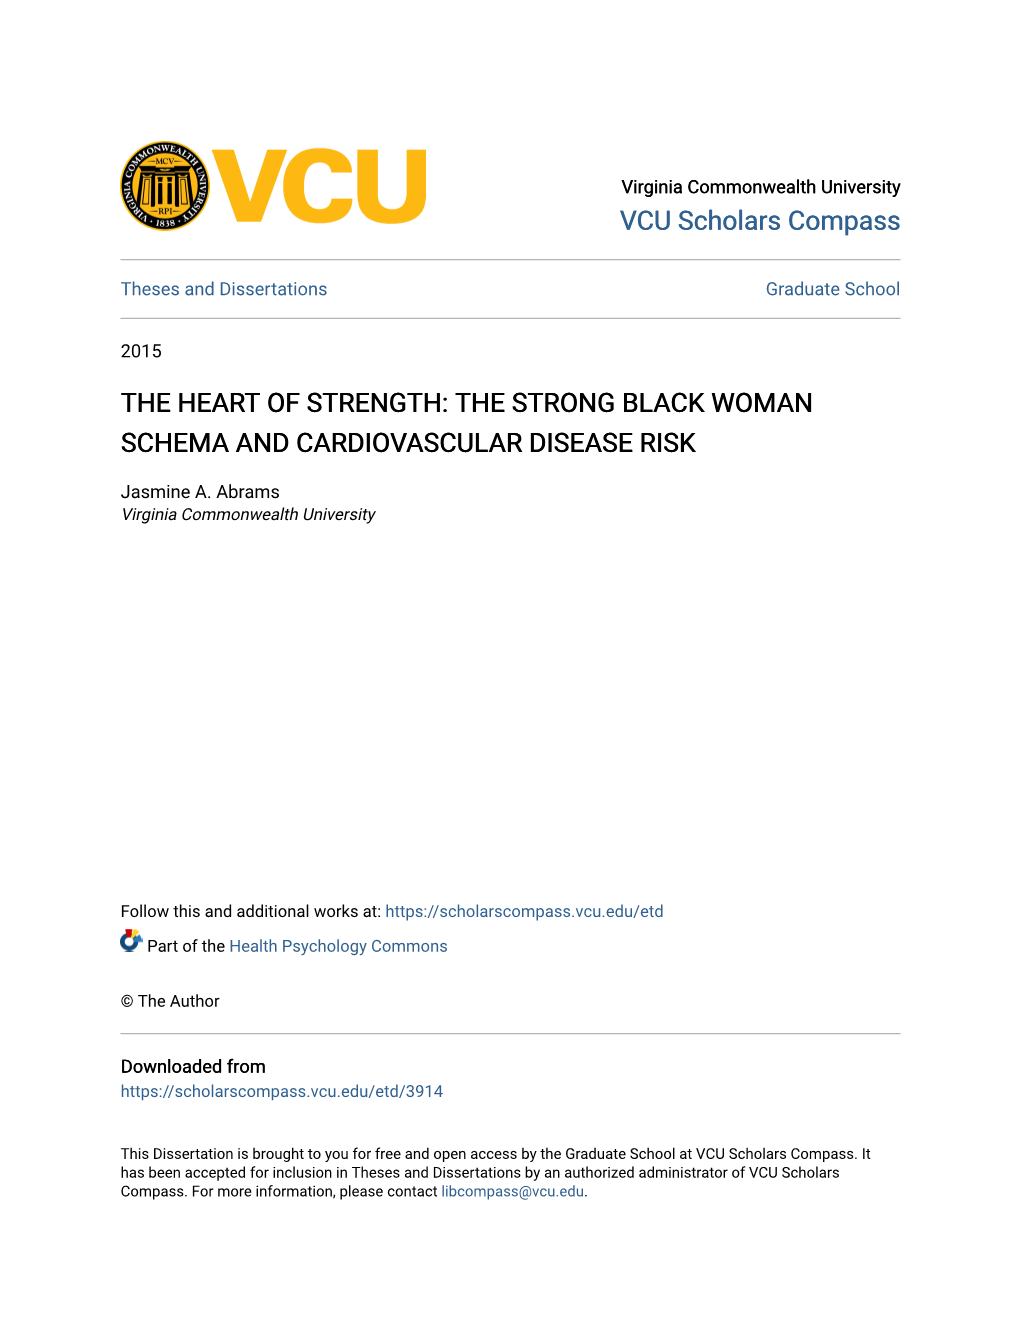 The Heart of Strength: the Strong Black Woman Schema and Cardiovascular Disease Risk